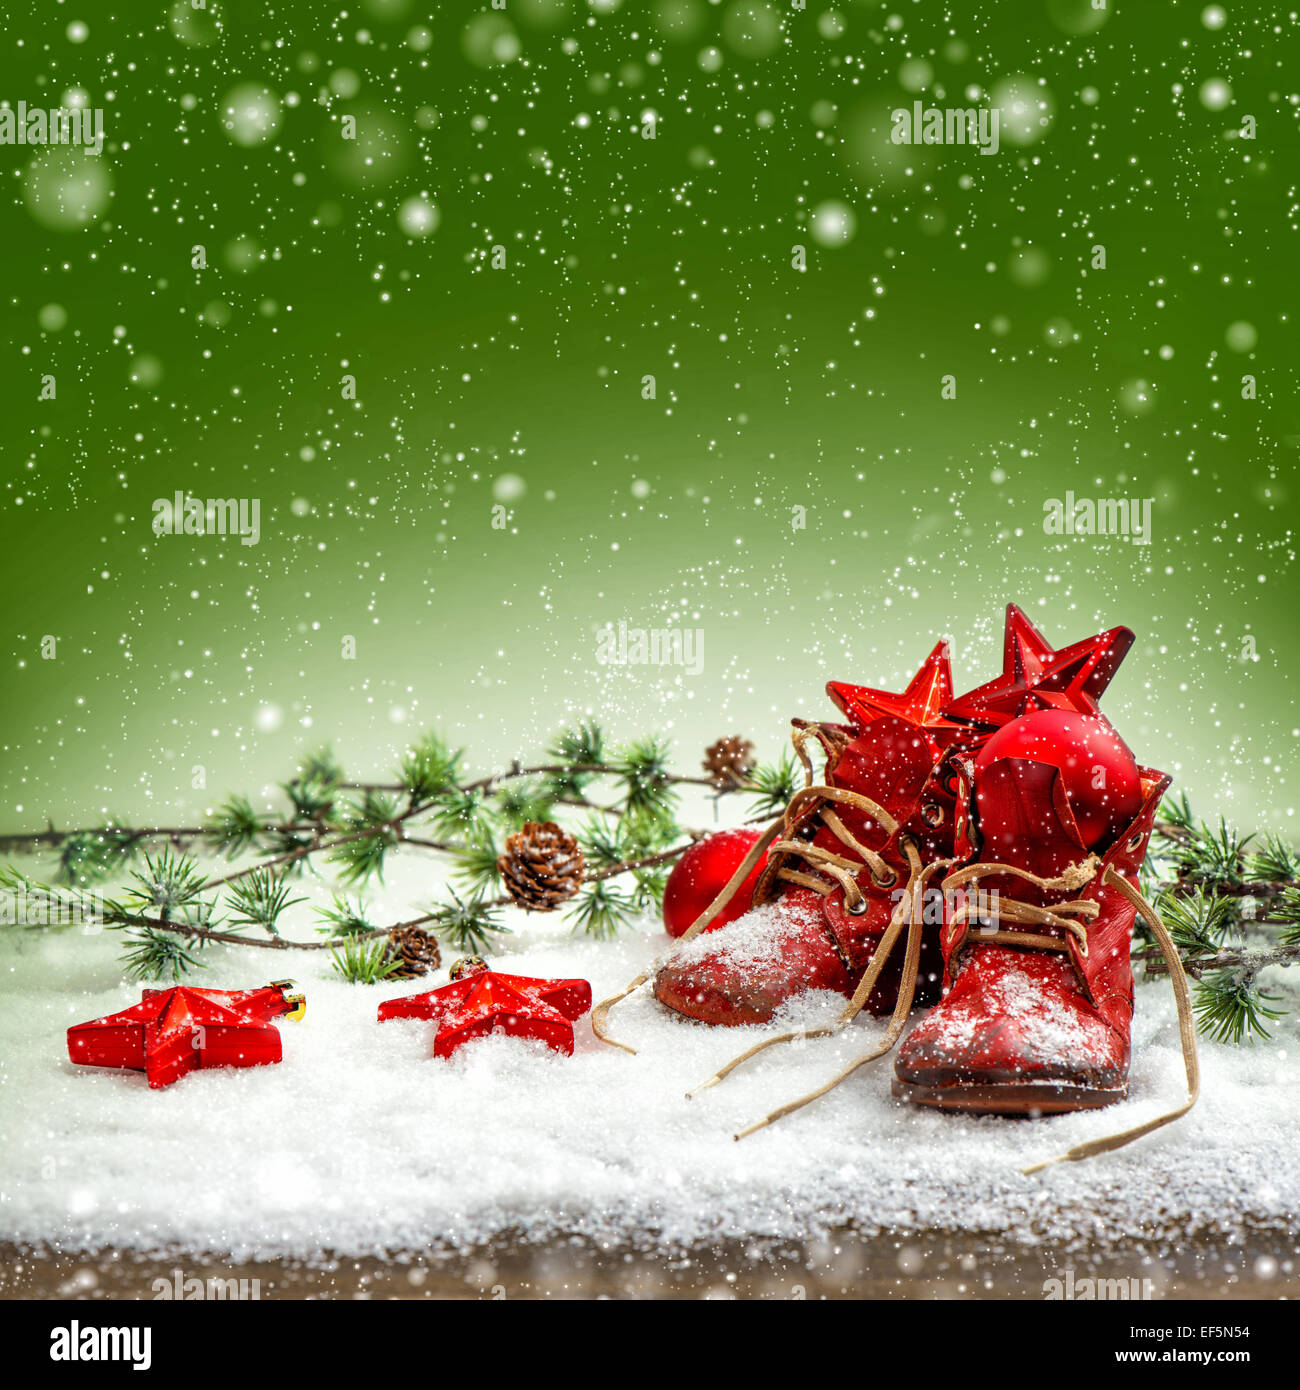 nostalgic christmas decoration with antique baby shoes. festive green background. retro style picture with snow effect Stock Photo